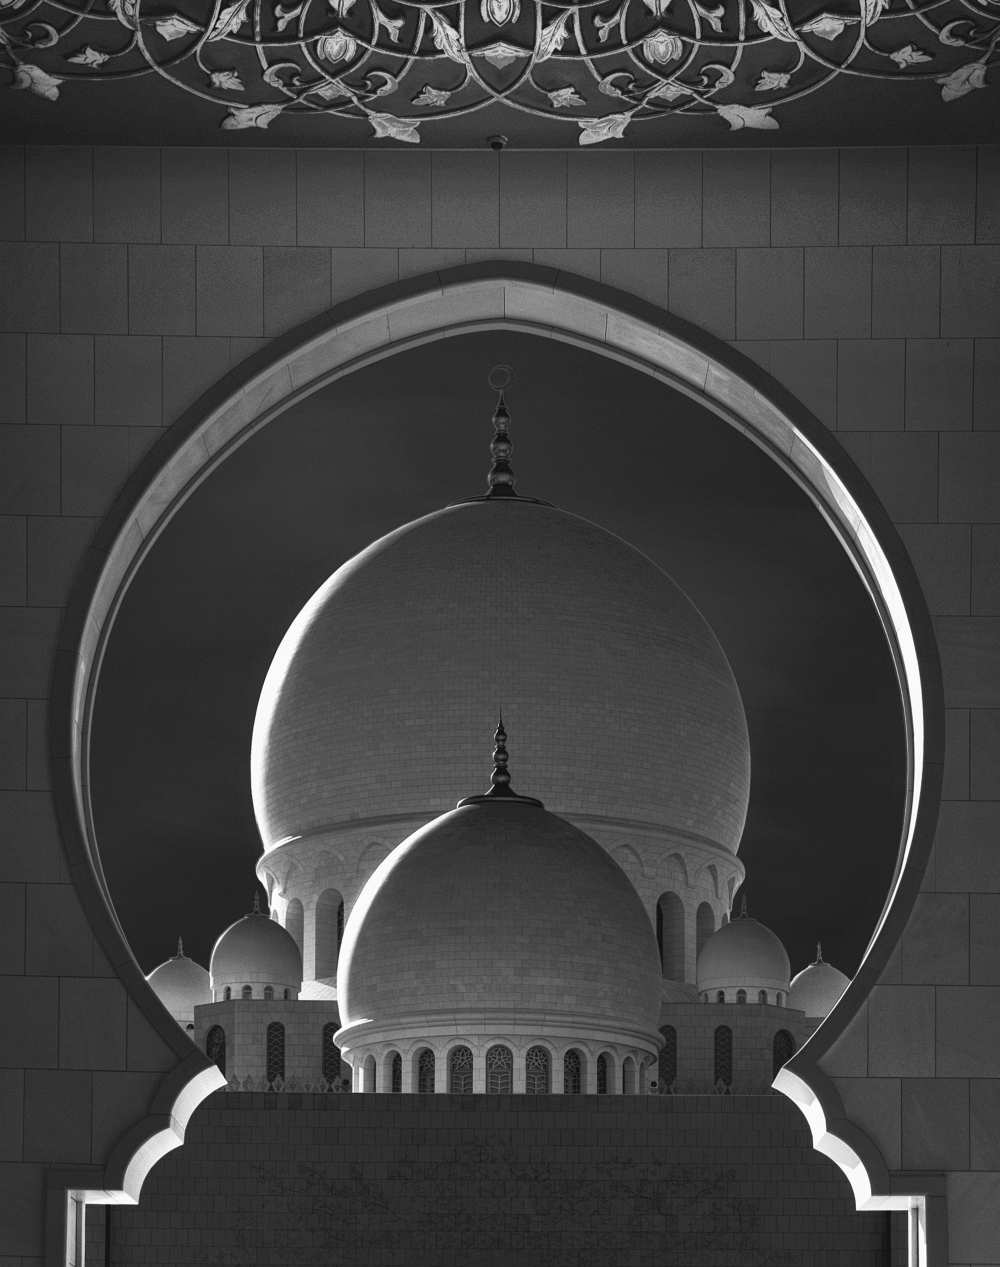 Dome framing from Ahmed Thabet